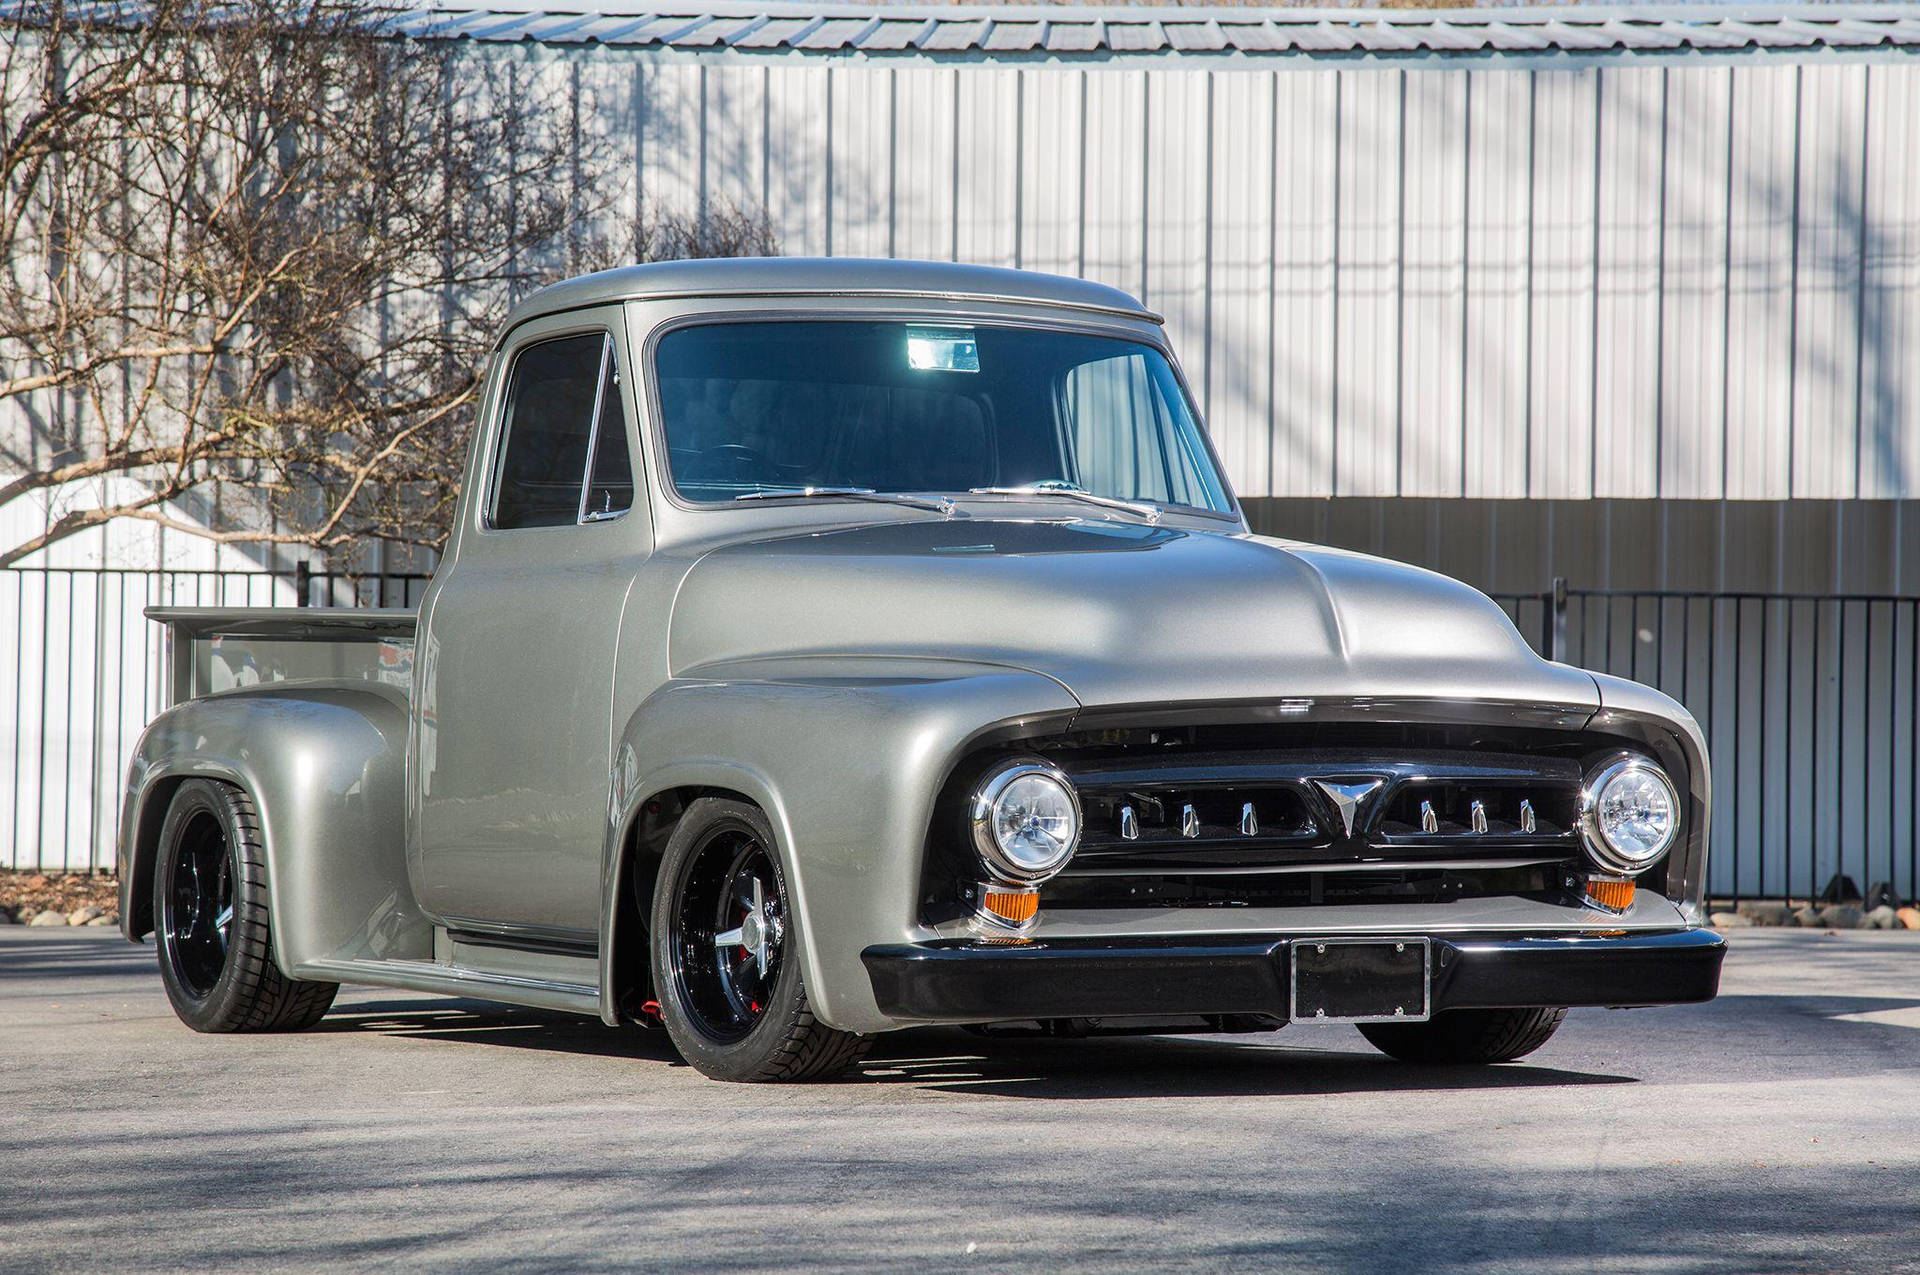 Majestic Glossy Gray Old Ford Truck